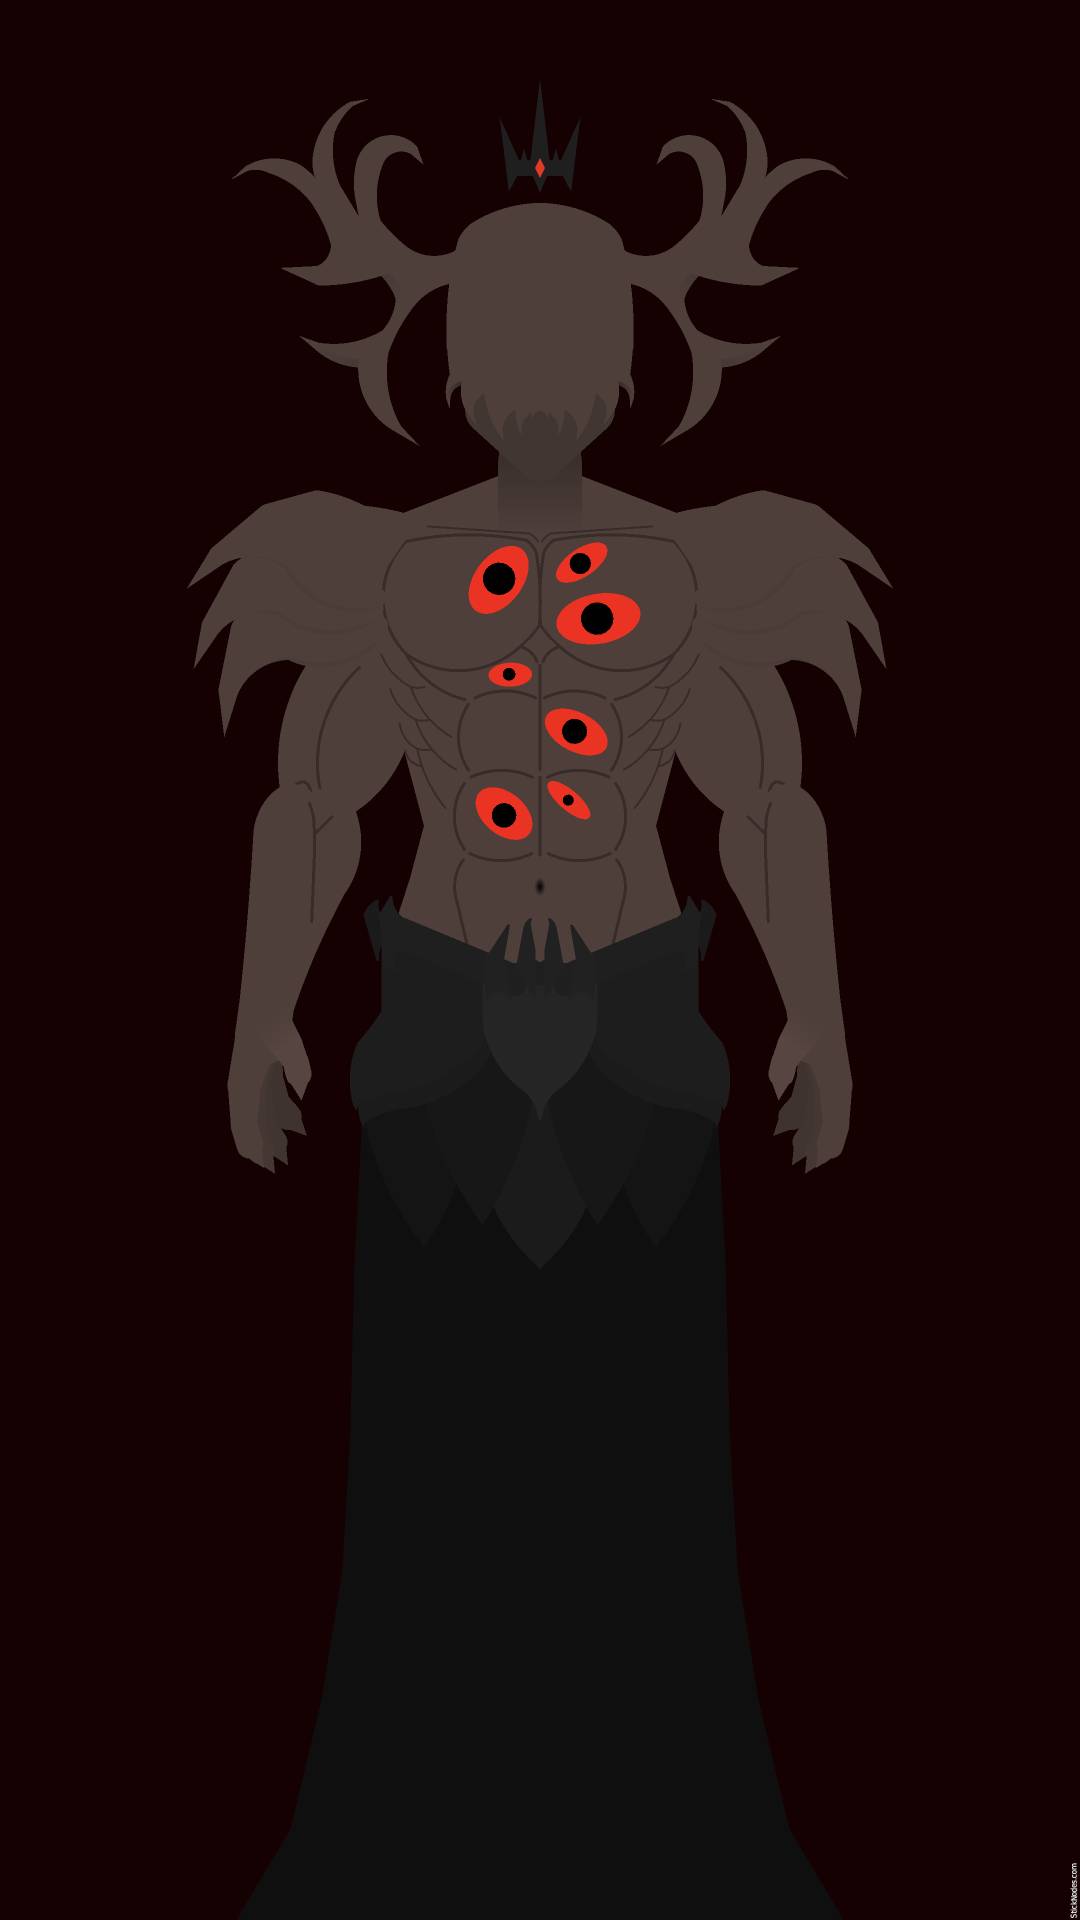 SCP-001 - How Actually Powerful is the Scarlet King? 